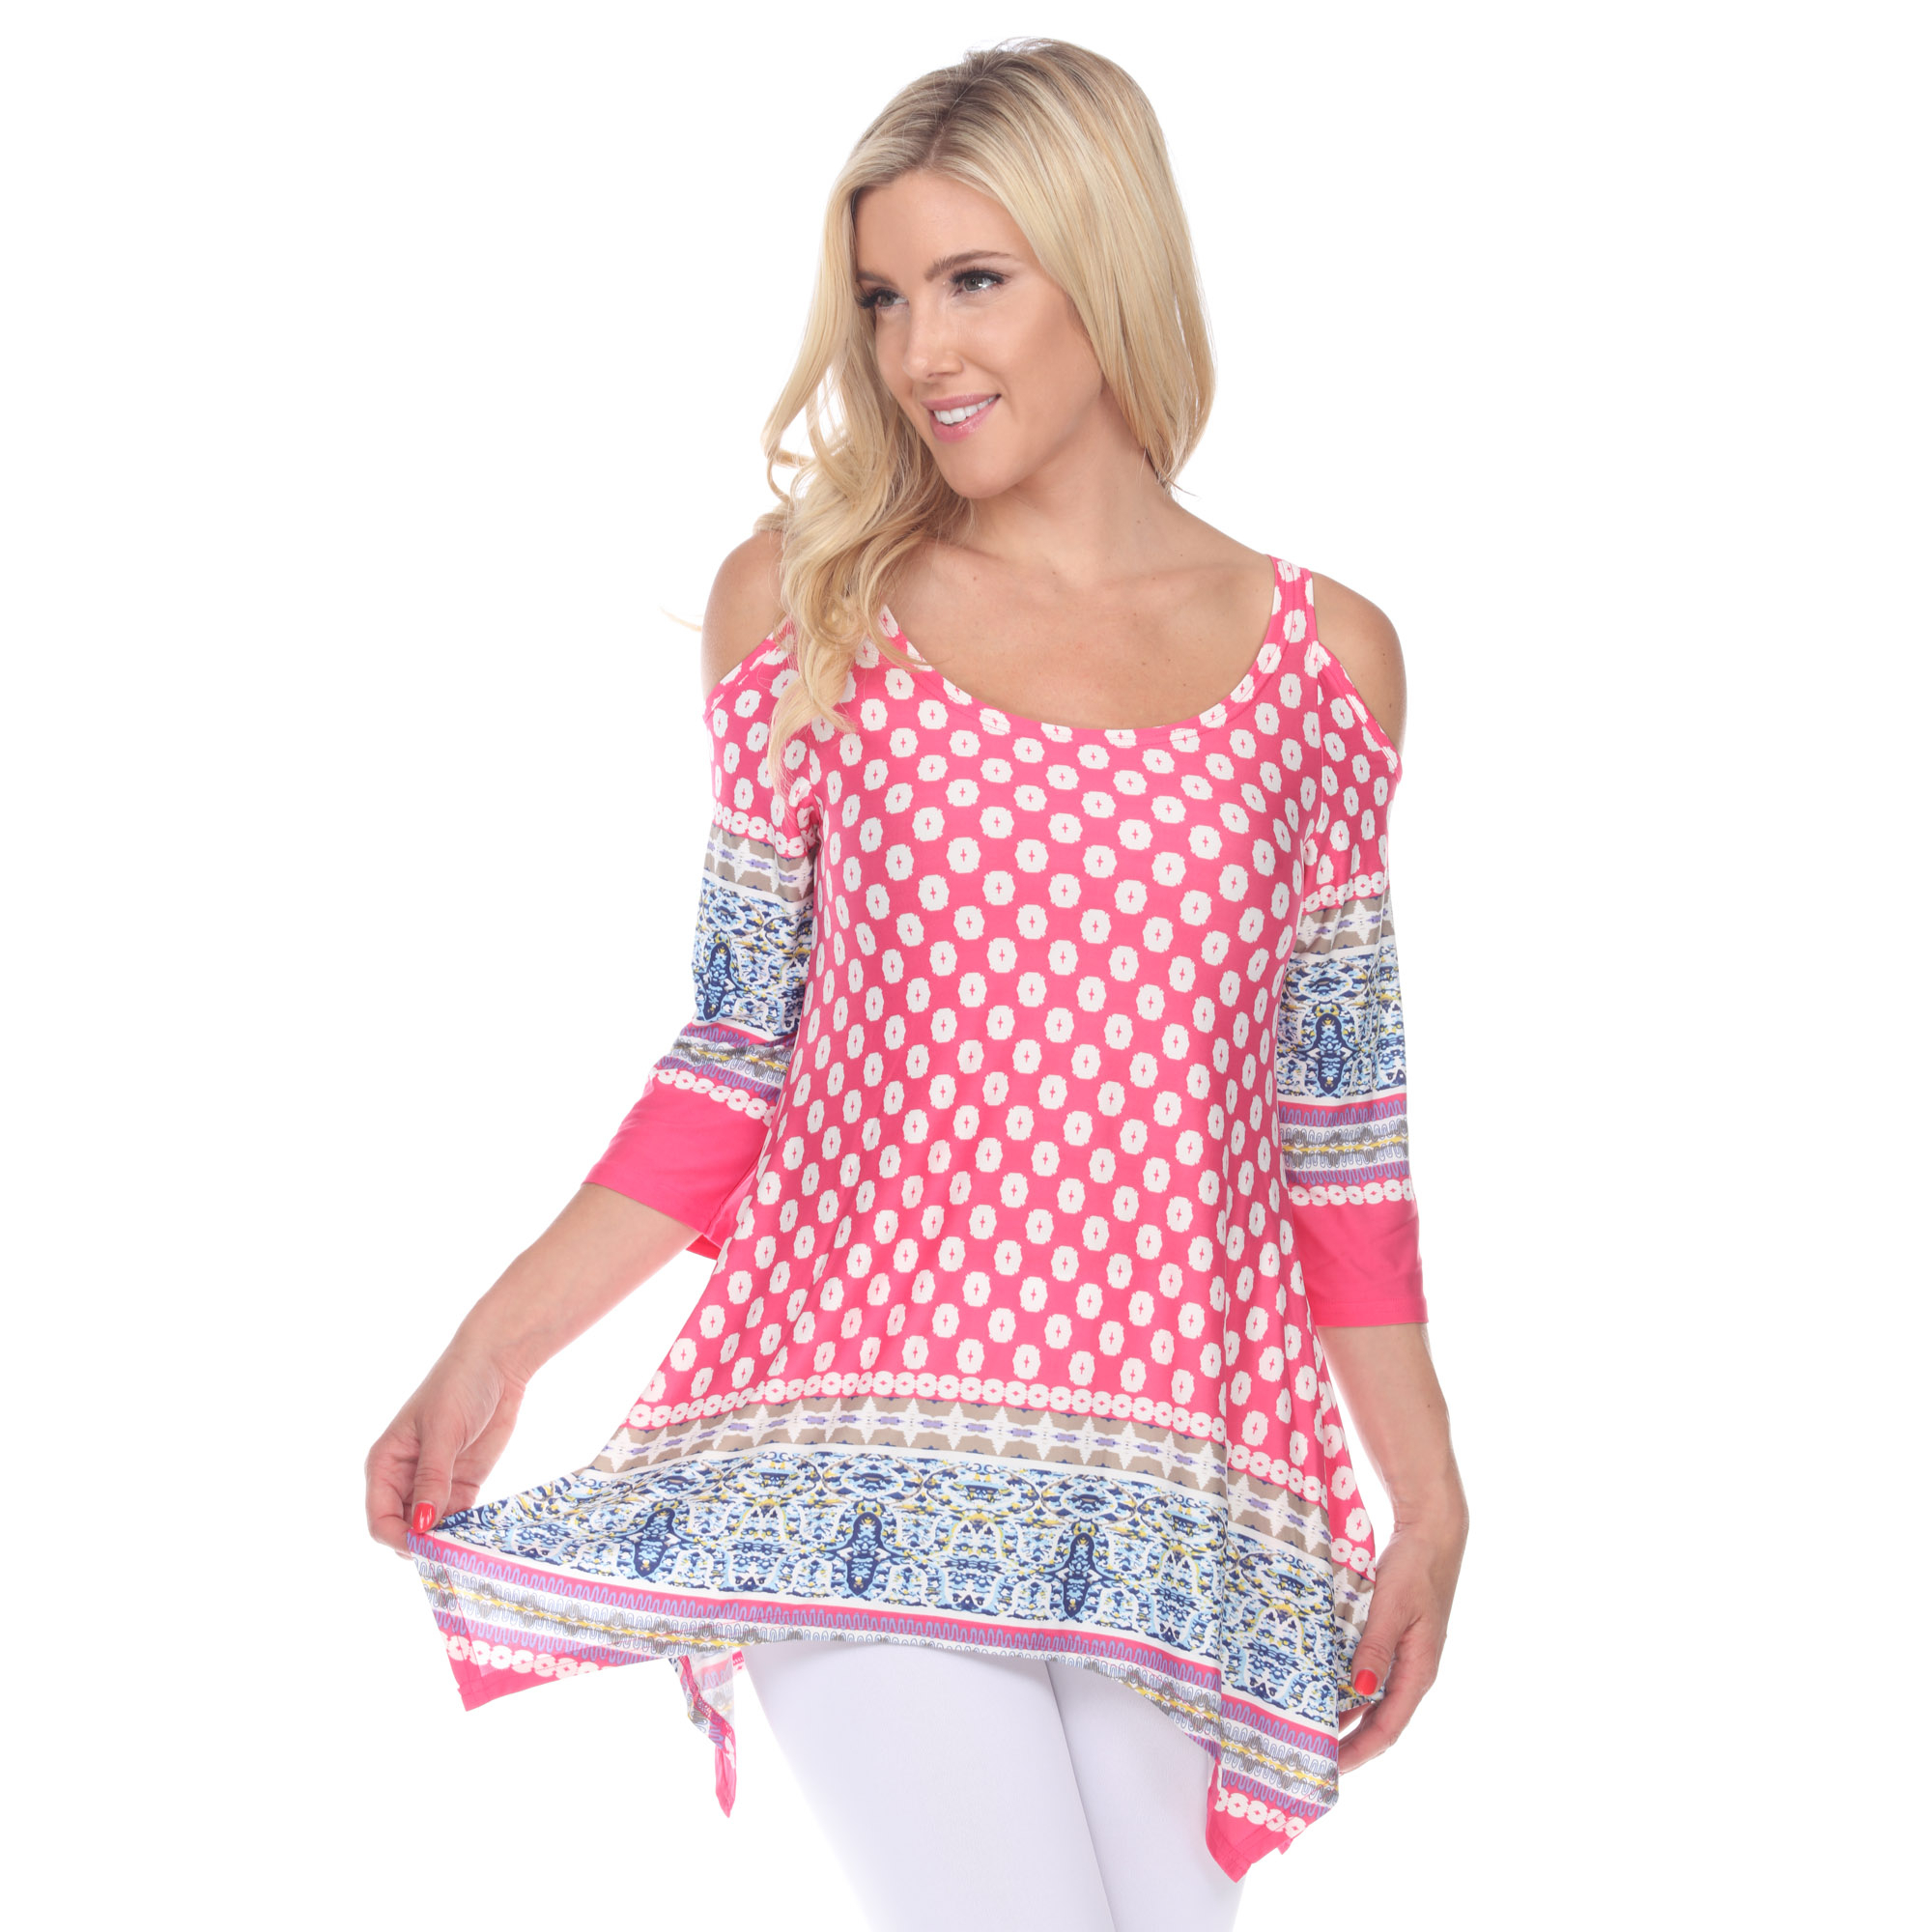 White Mark Women's Cold Shoulder Quarter Sleeve Printed Tunic Top With Pockets - Pink/White Polka Dots, 2X